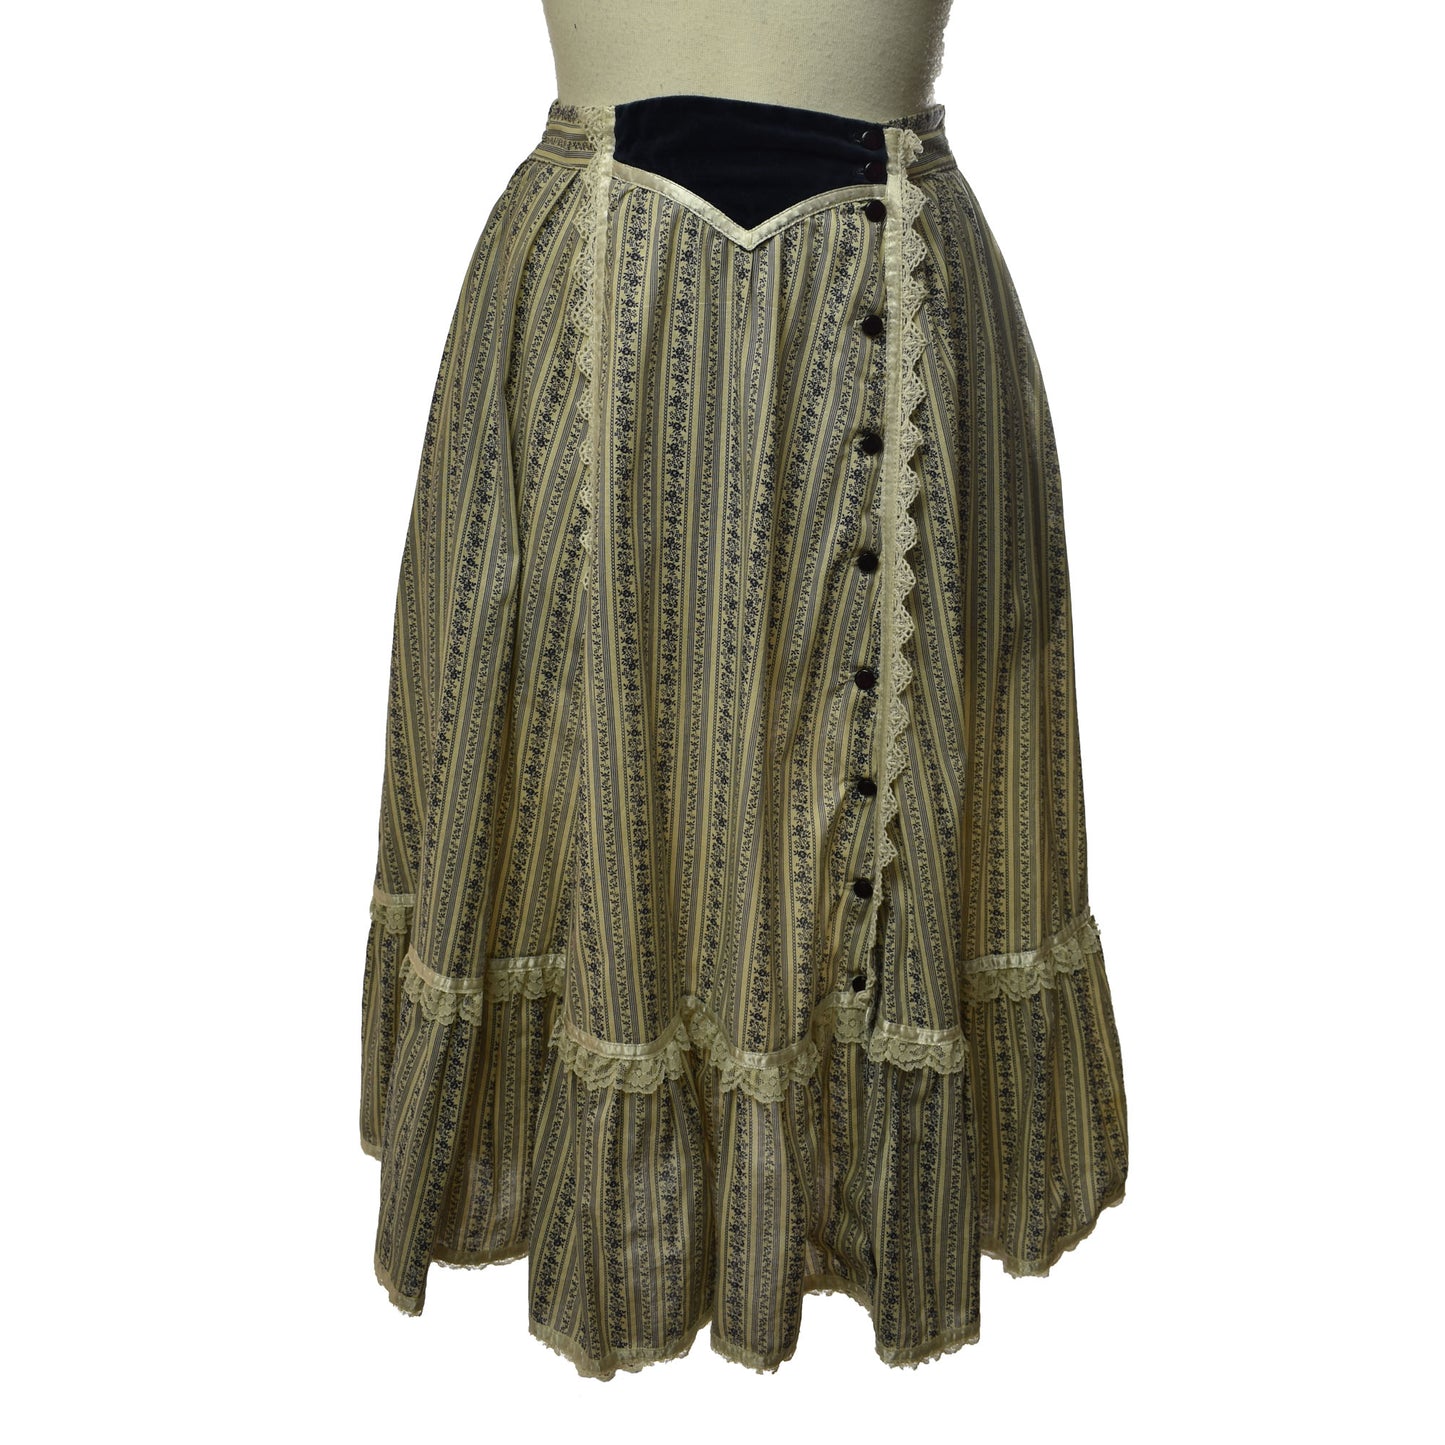 Vintage 70s Gunne Sax by Jessica Floral Printed Skirt with Lace and Satin Ribboning and Velvet Detail